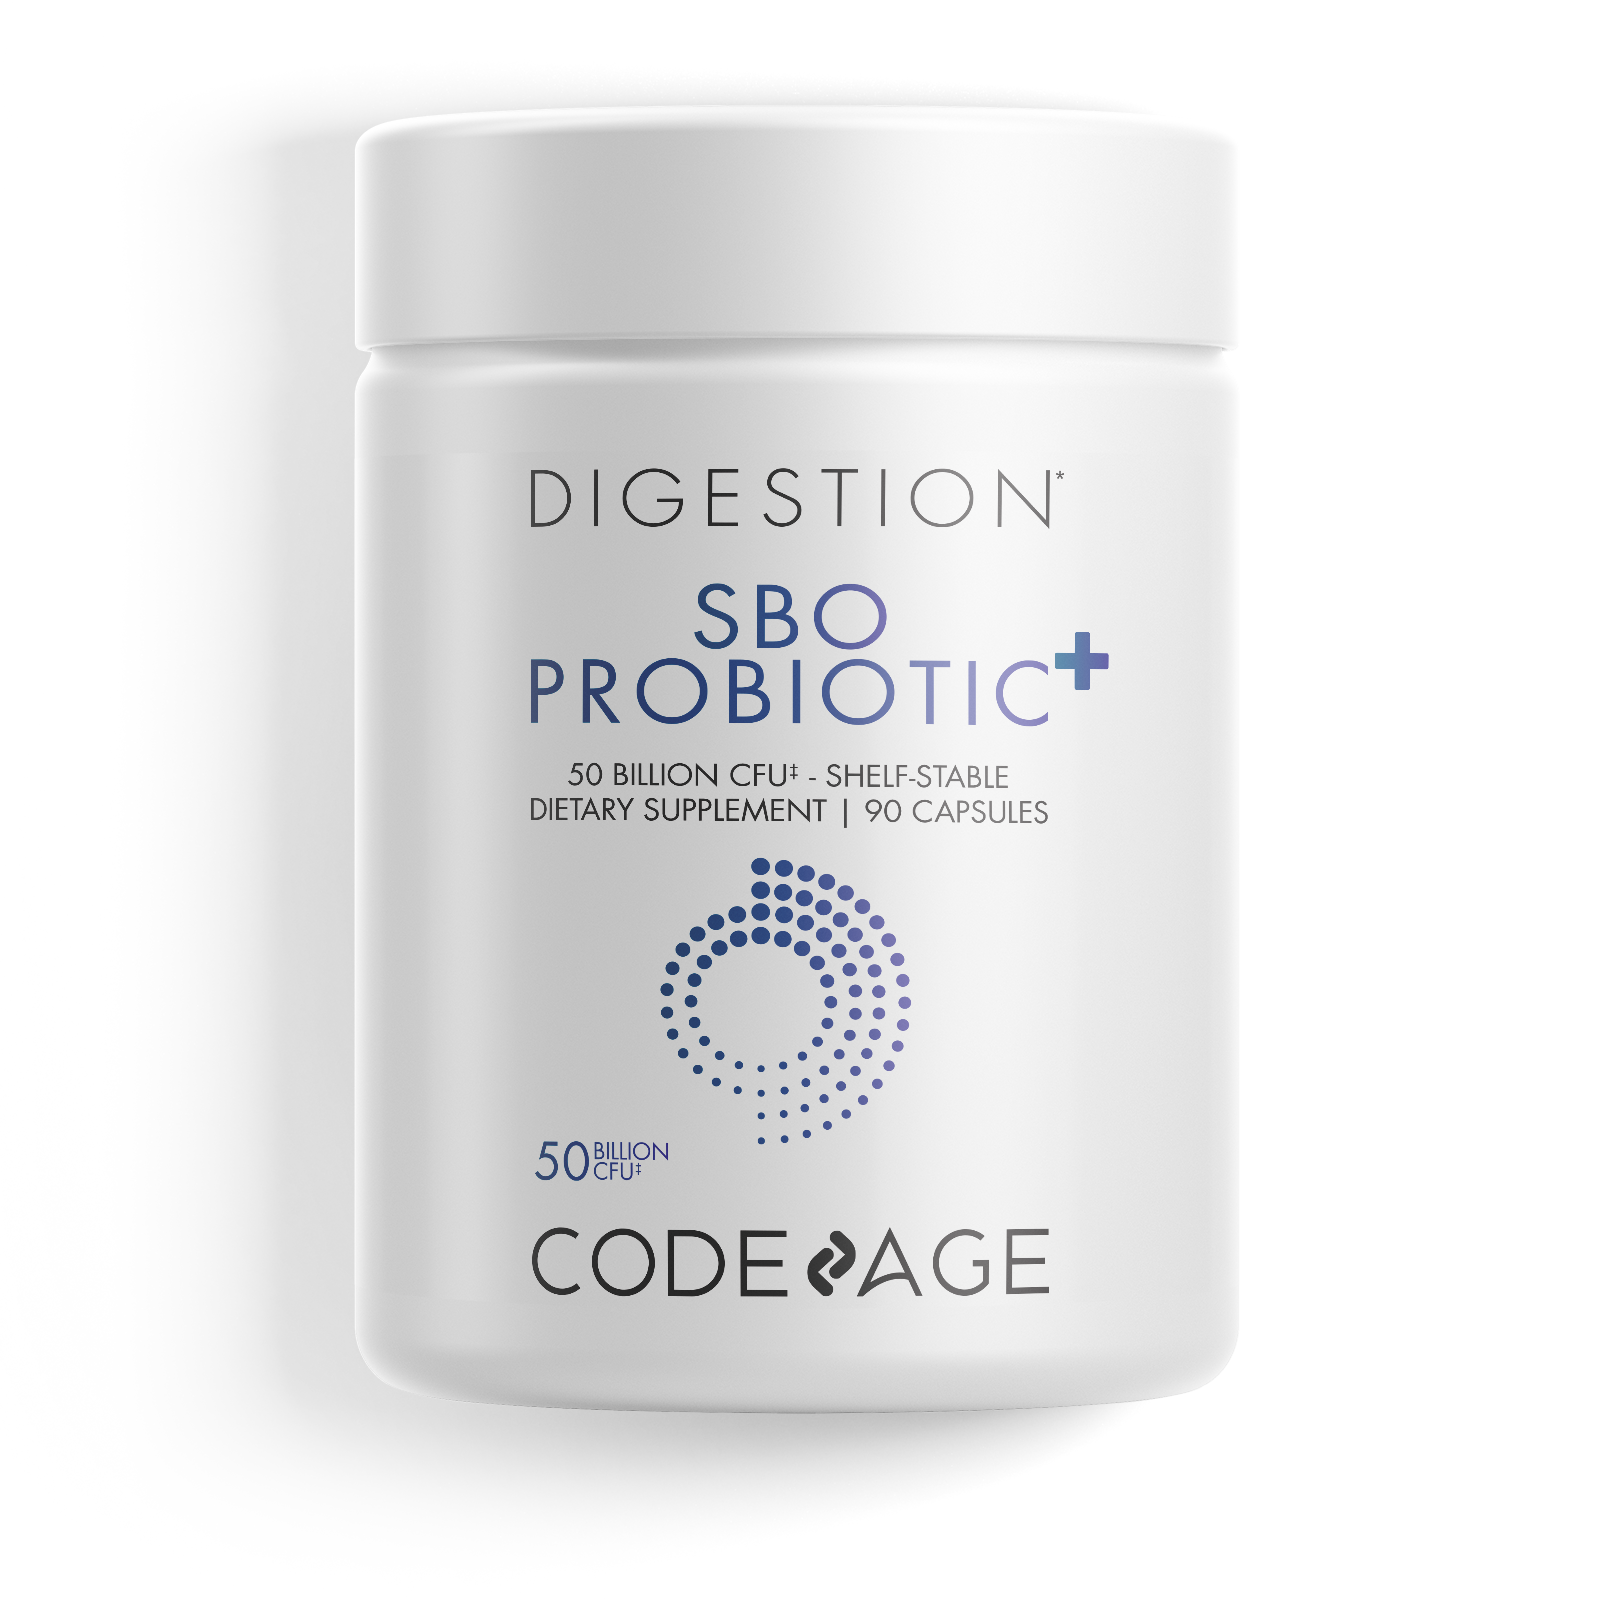 SBO Probiotics 50 Billion CFU Capsules Soil-Based Organisms with Prebiotics Supplement by Codeage - High-quality Probiotic by Codeage at 